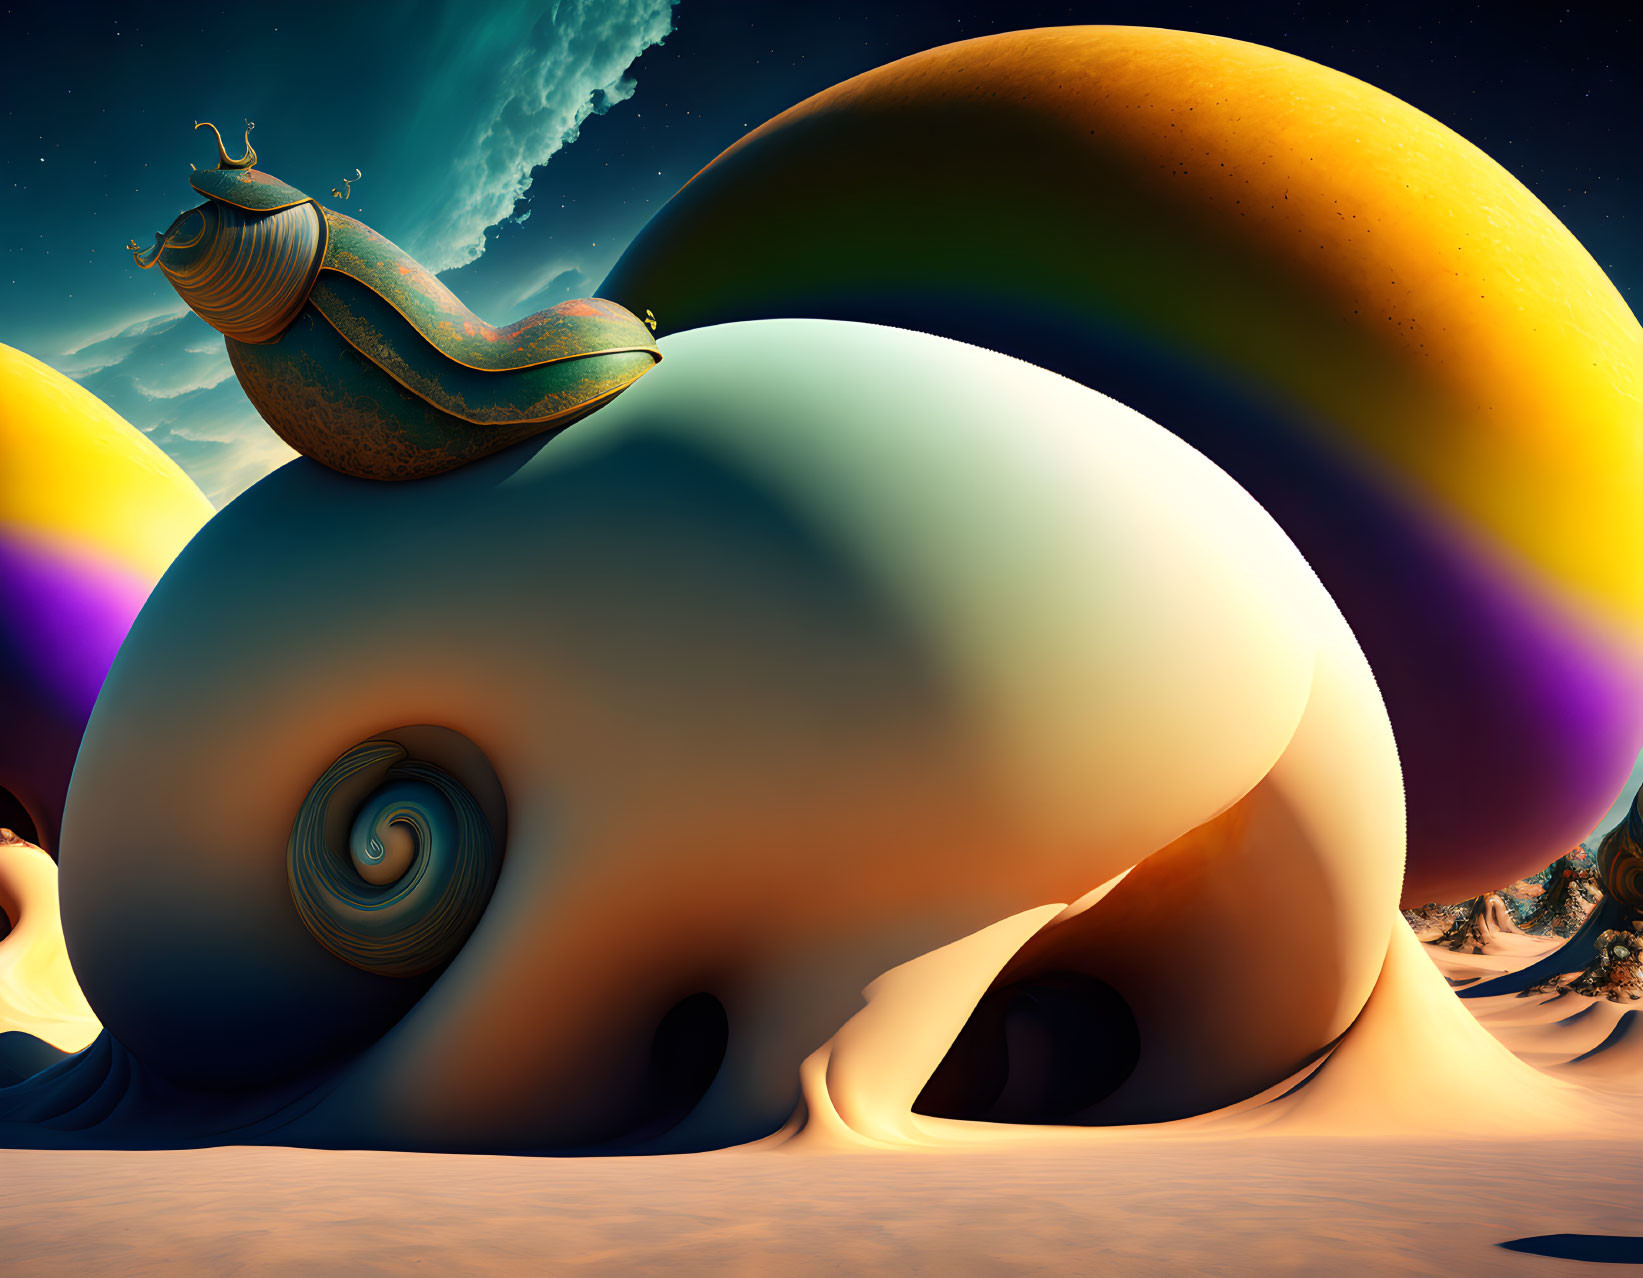 Colorful Oversized Snail Shells in Whimsical Landscape